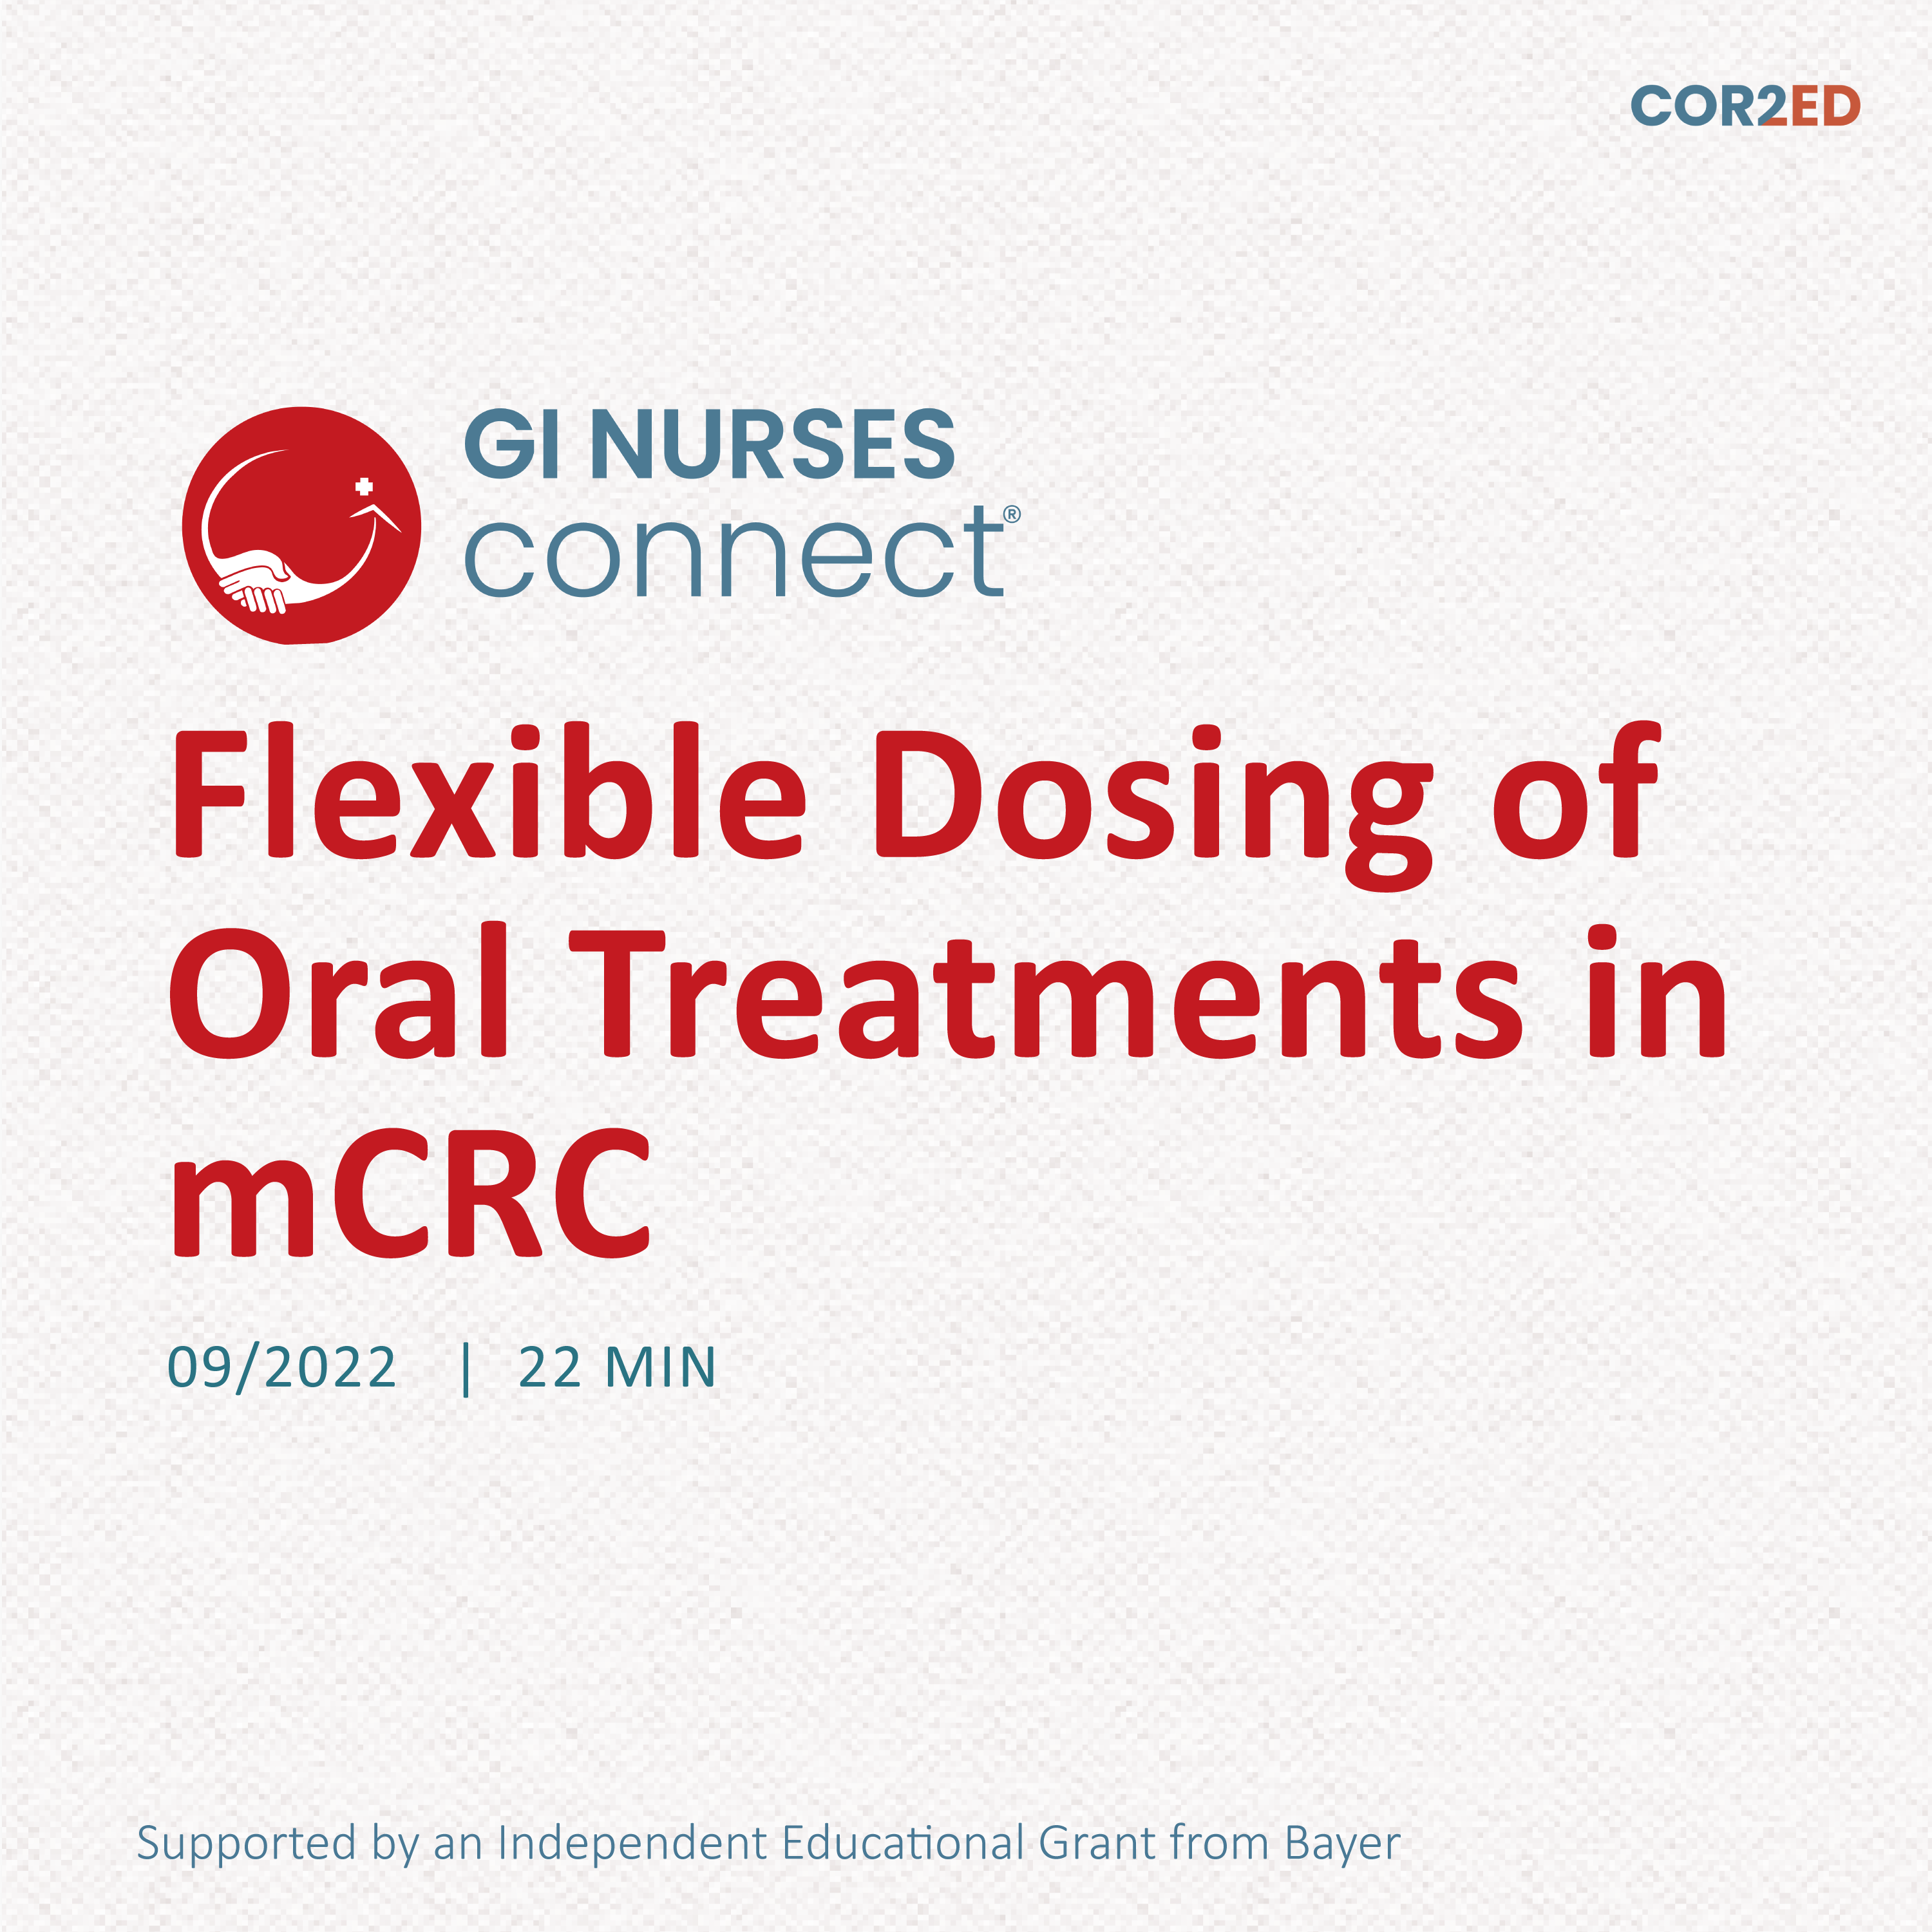 Flexible Dosing of Oral Treatments in mCRC